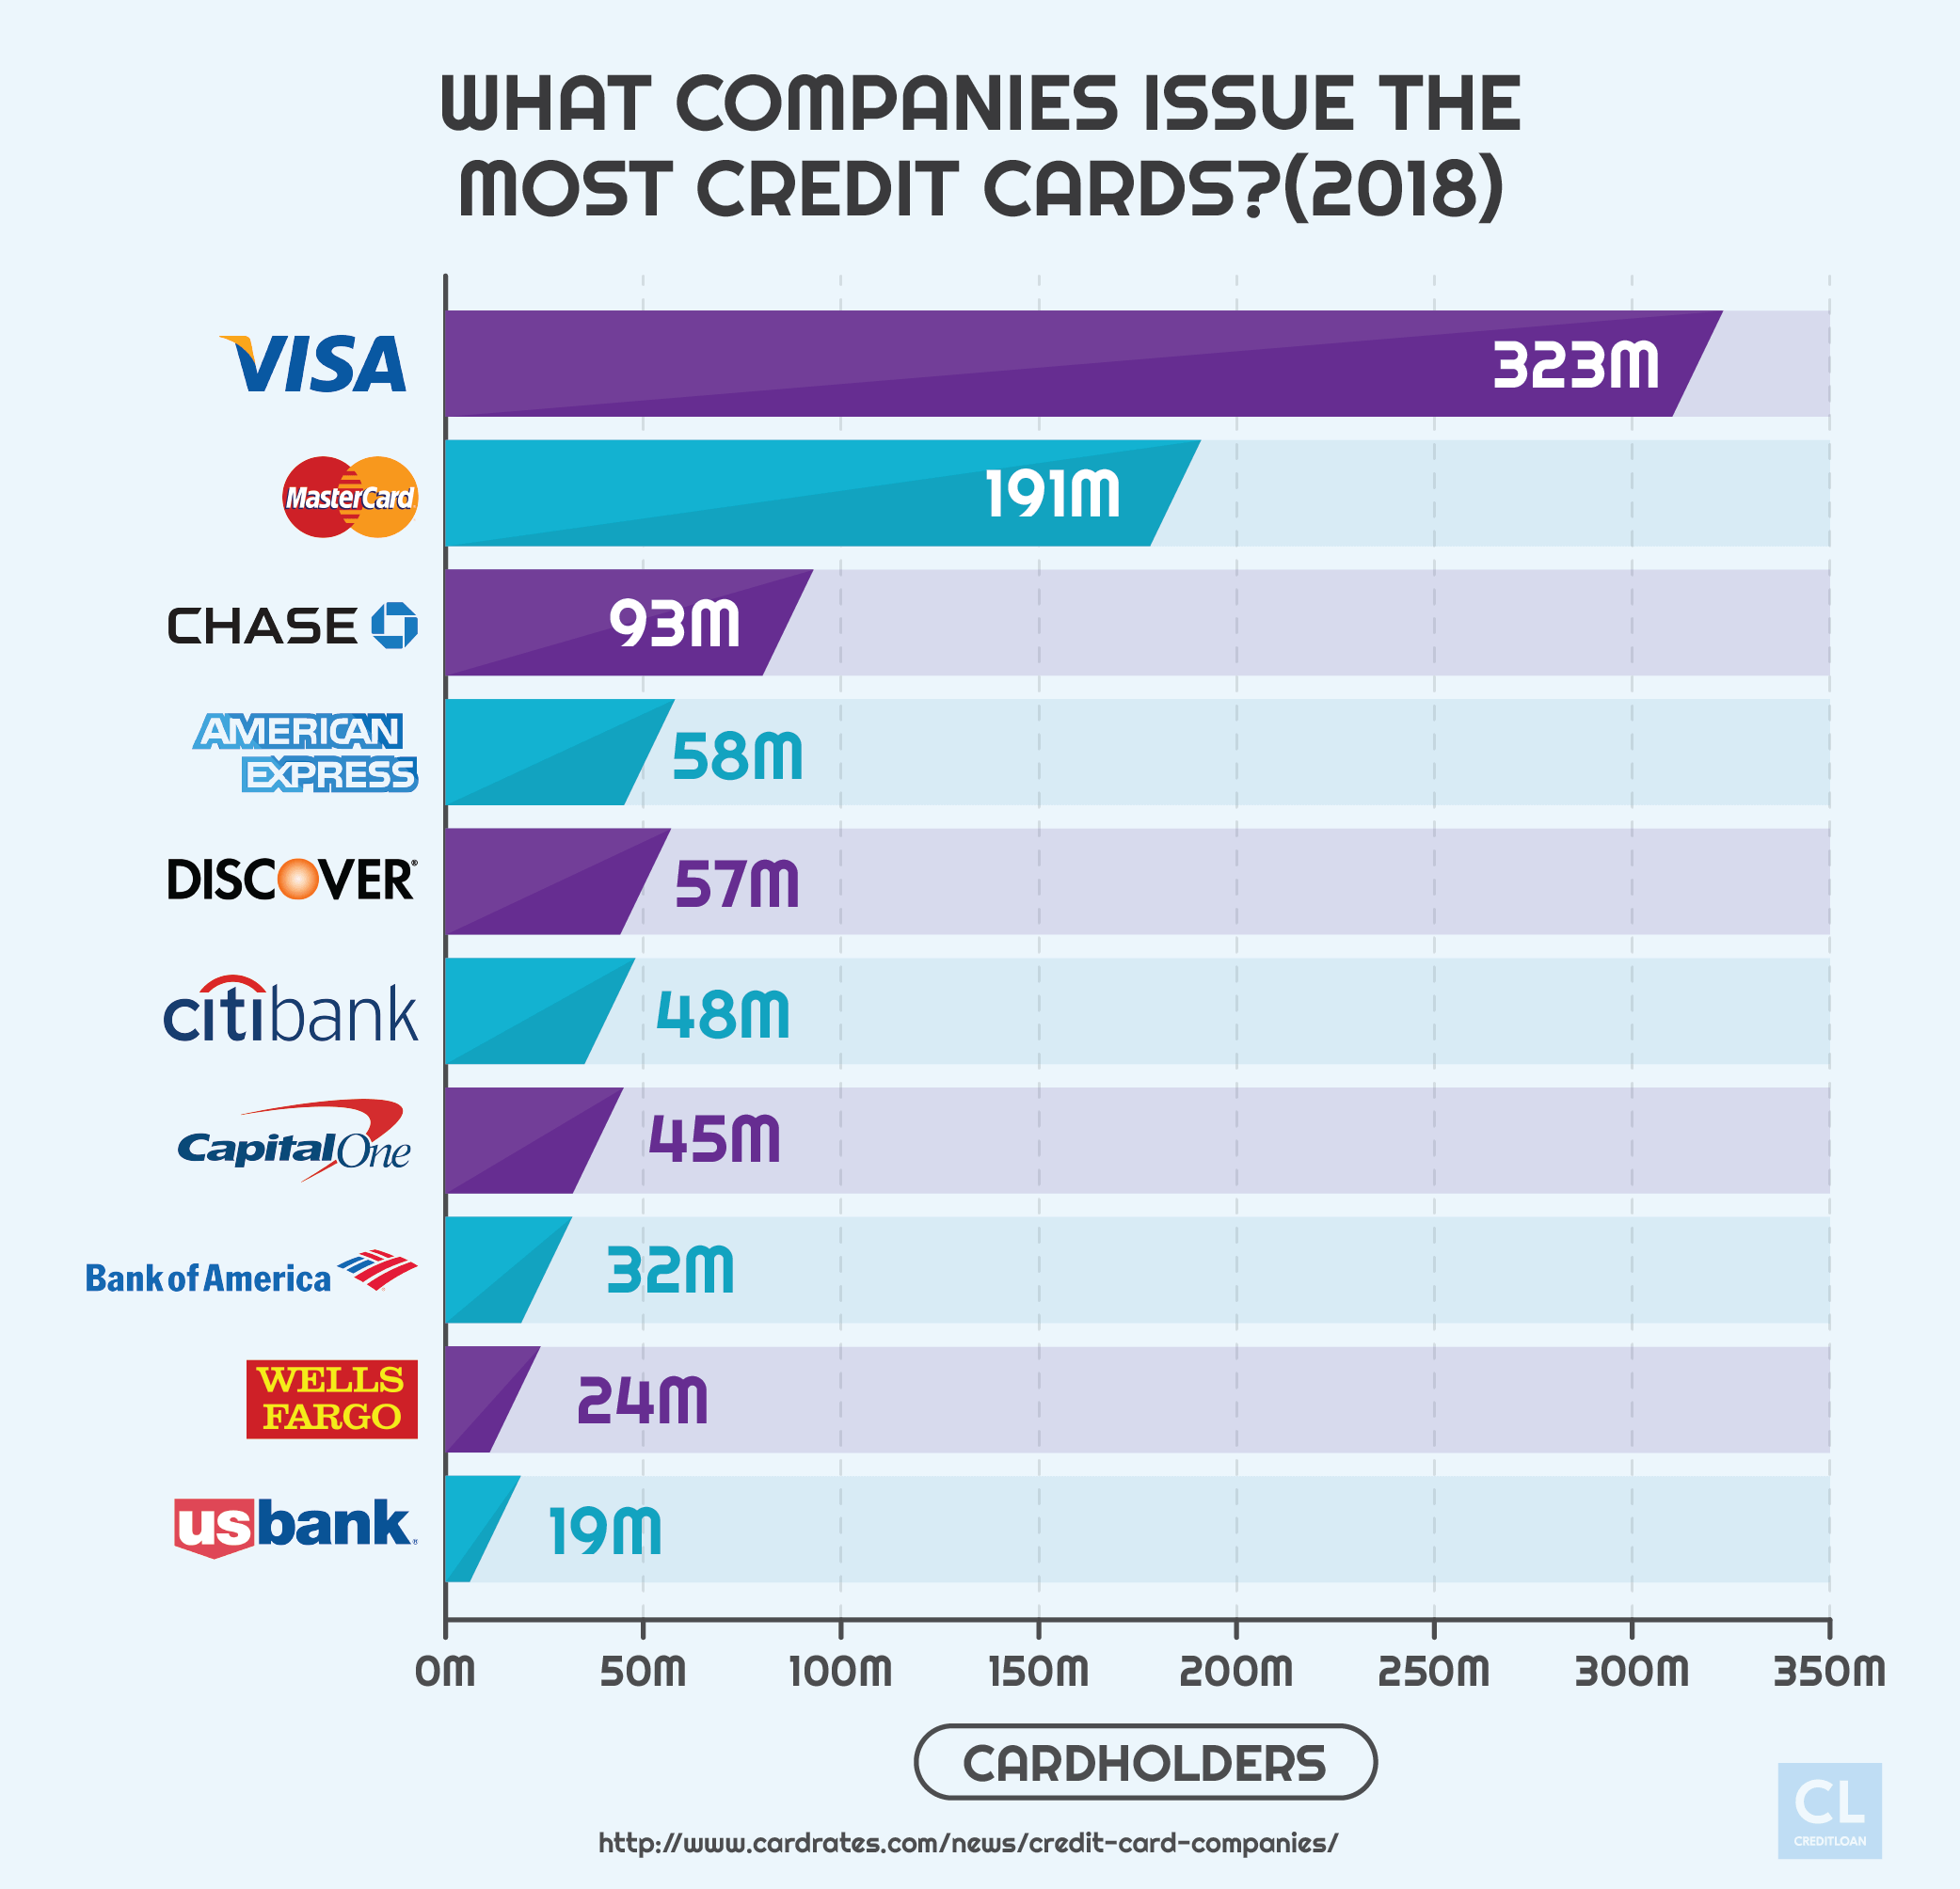 Companies Issuing the Most Credit Cards in 2018